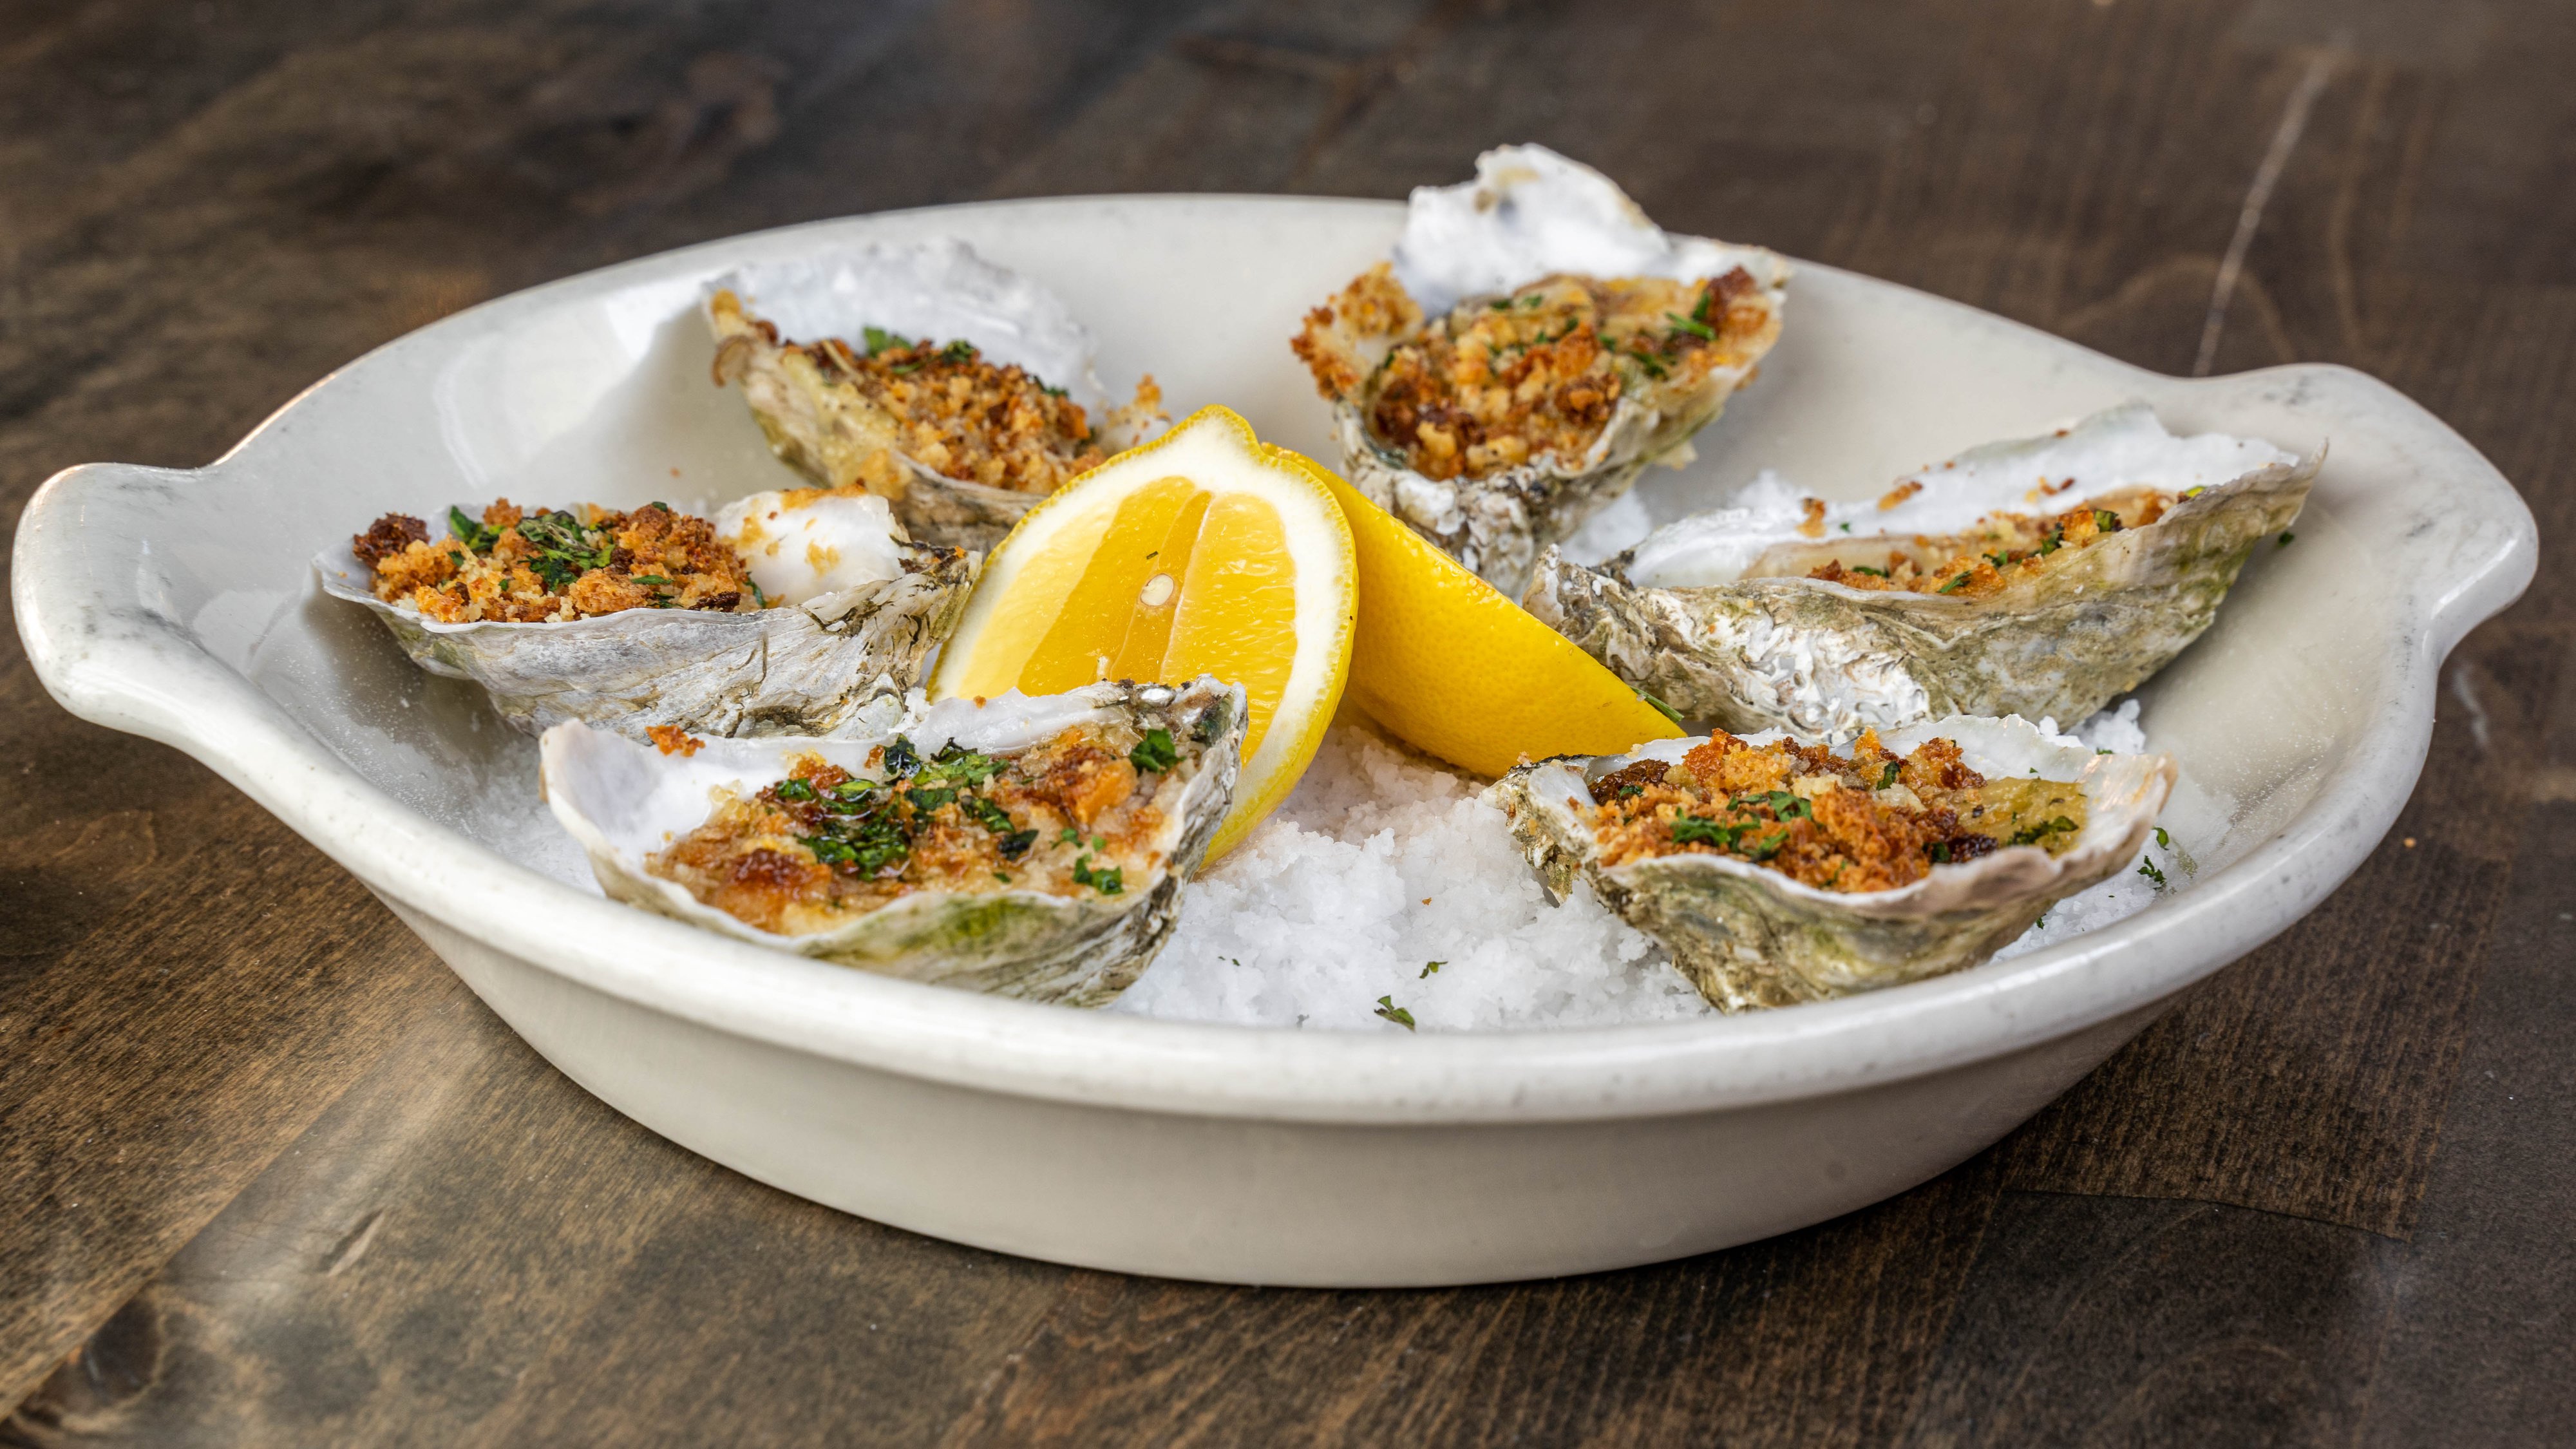 Garlic Mojo Based CrackerJax Oysters from our sister restaurant Jax Fish House